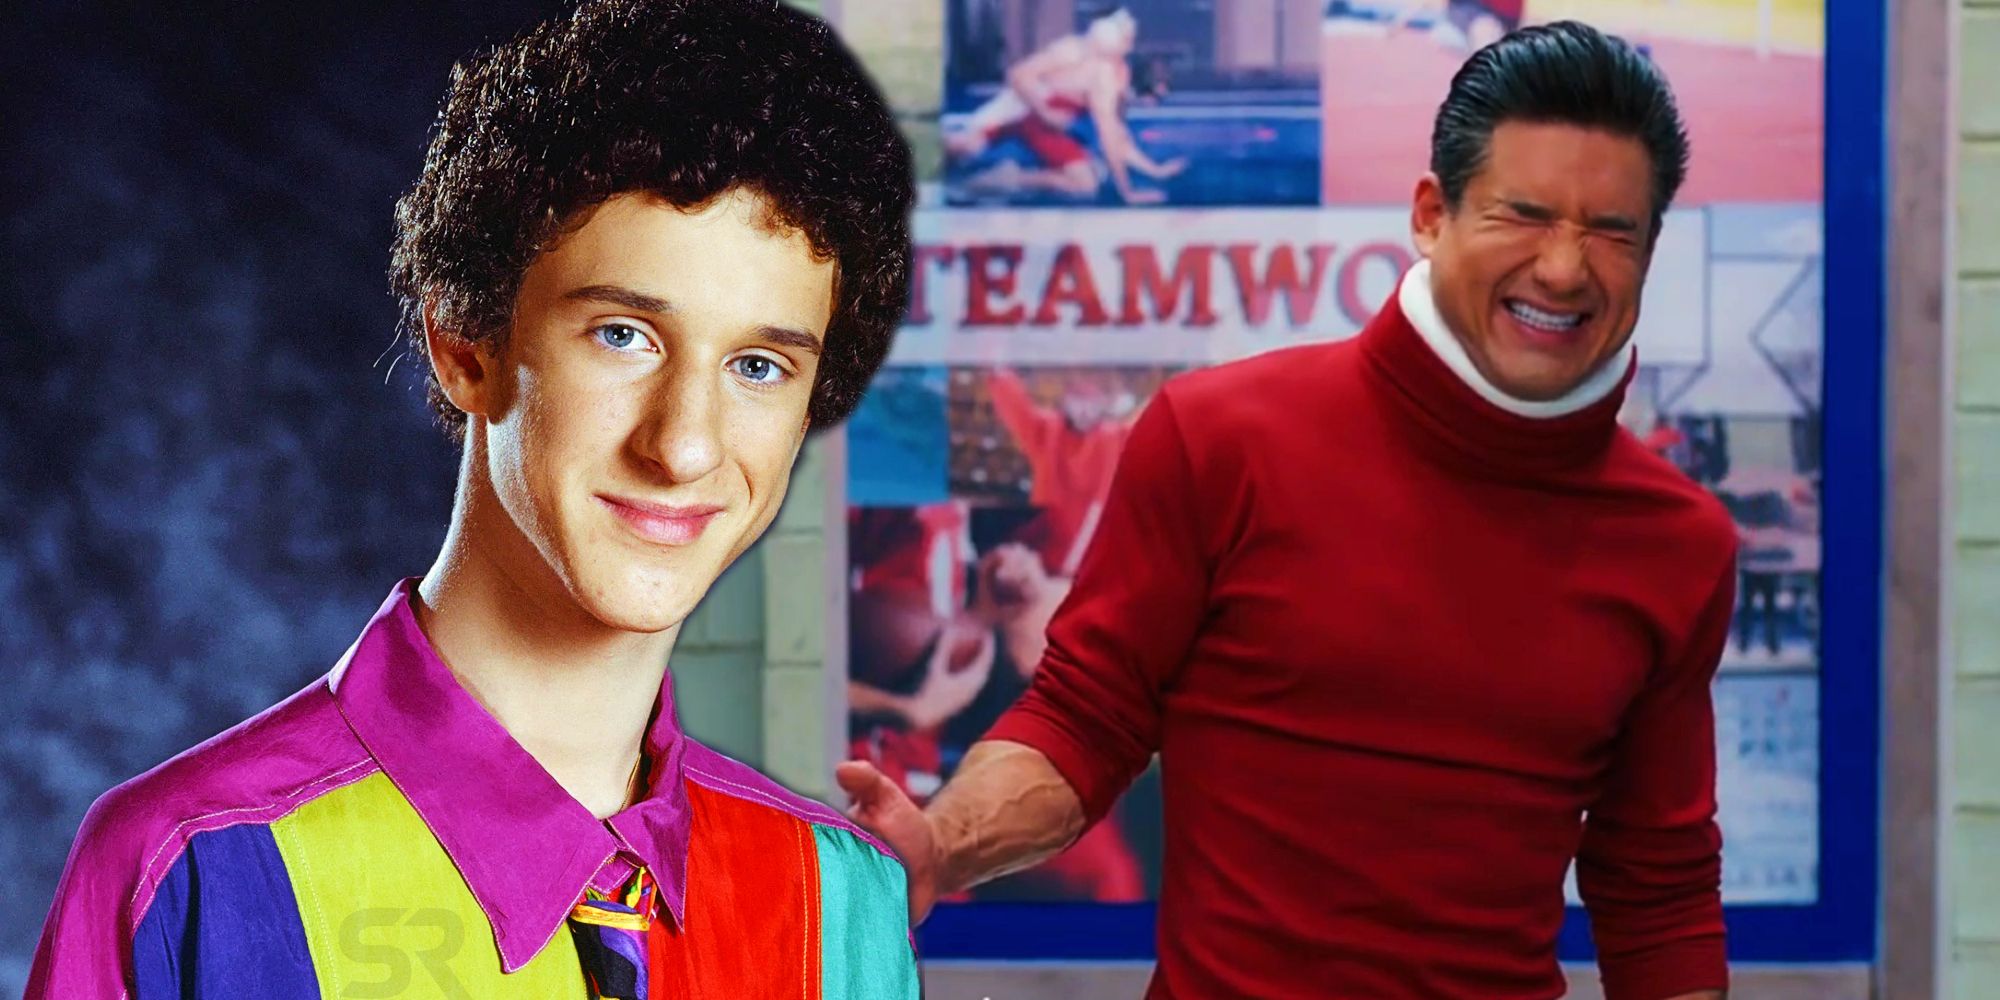 Dustin Diamond as Screech and Mario Lopez as Slater in Saved by the Bell